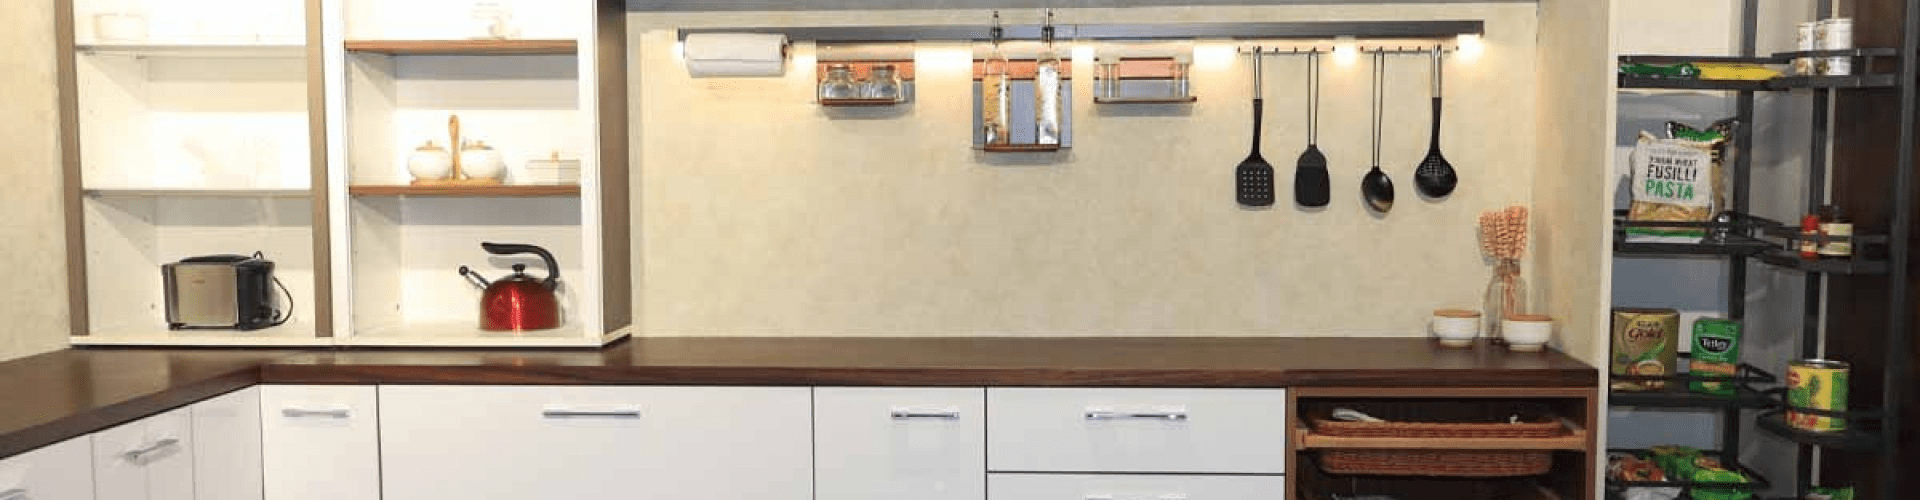 Kitchen-Fittings-and-Accessories